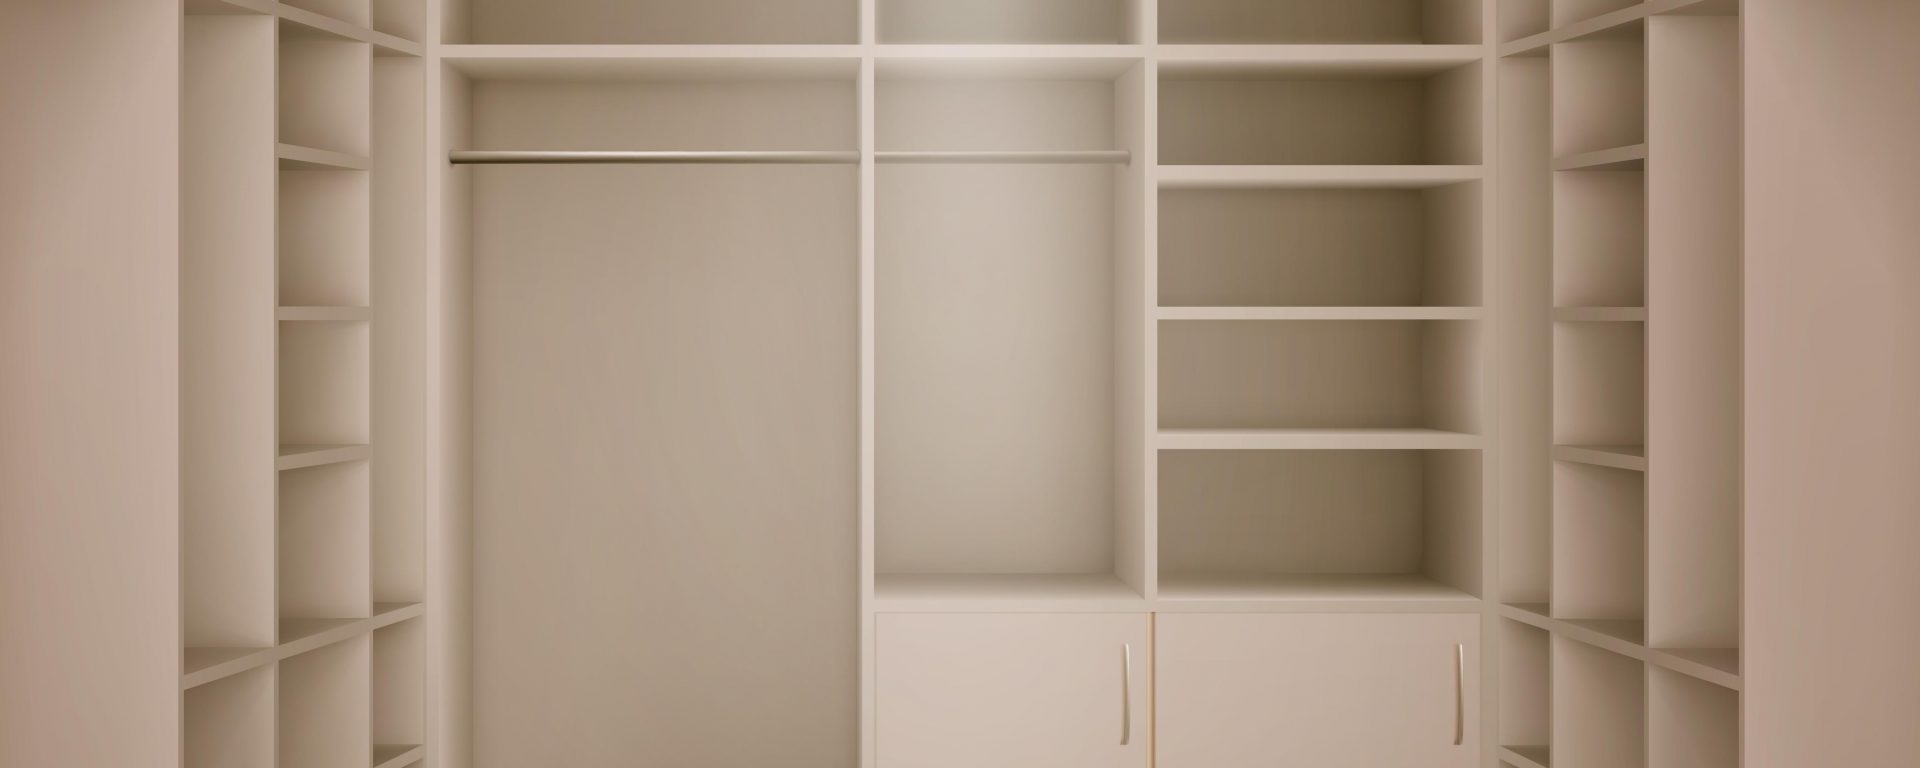 An empty, walk-in closet with many free shelves and a wood floor.